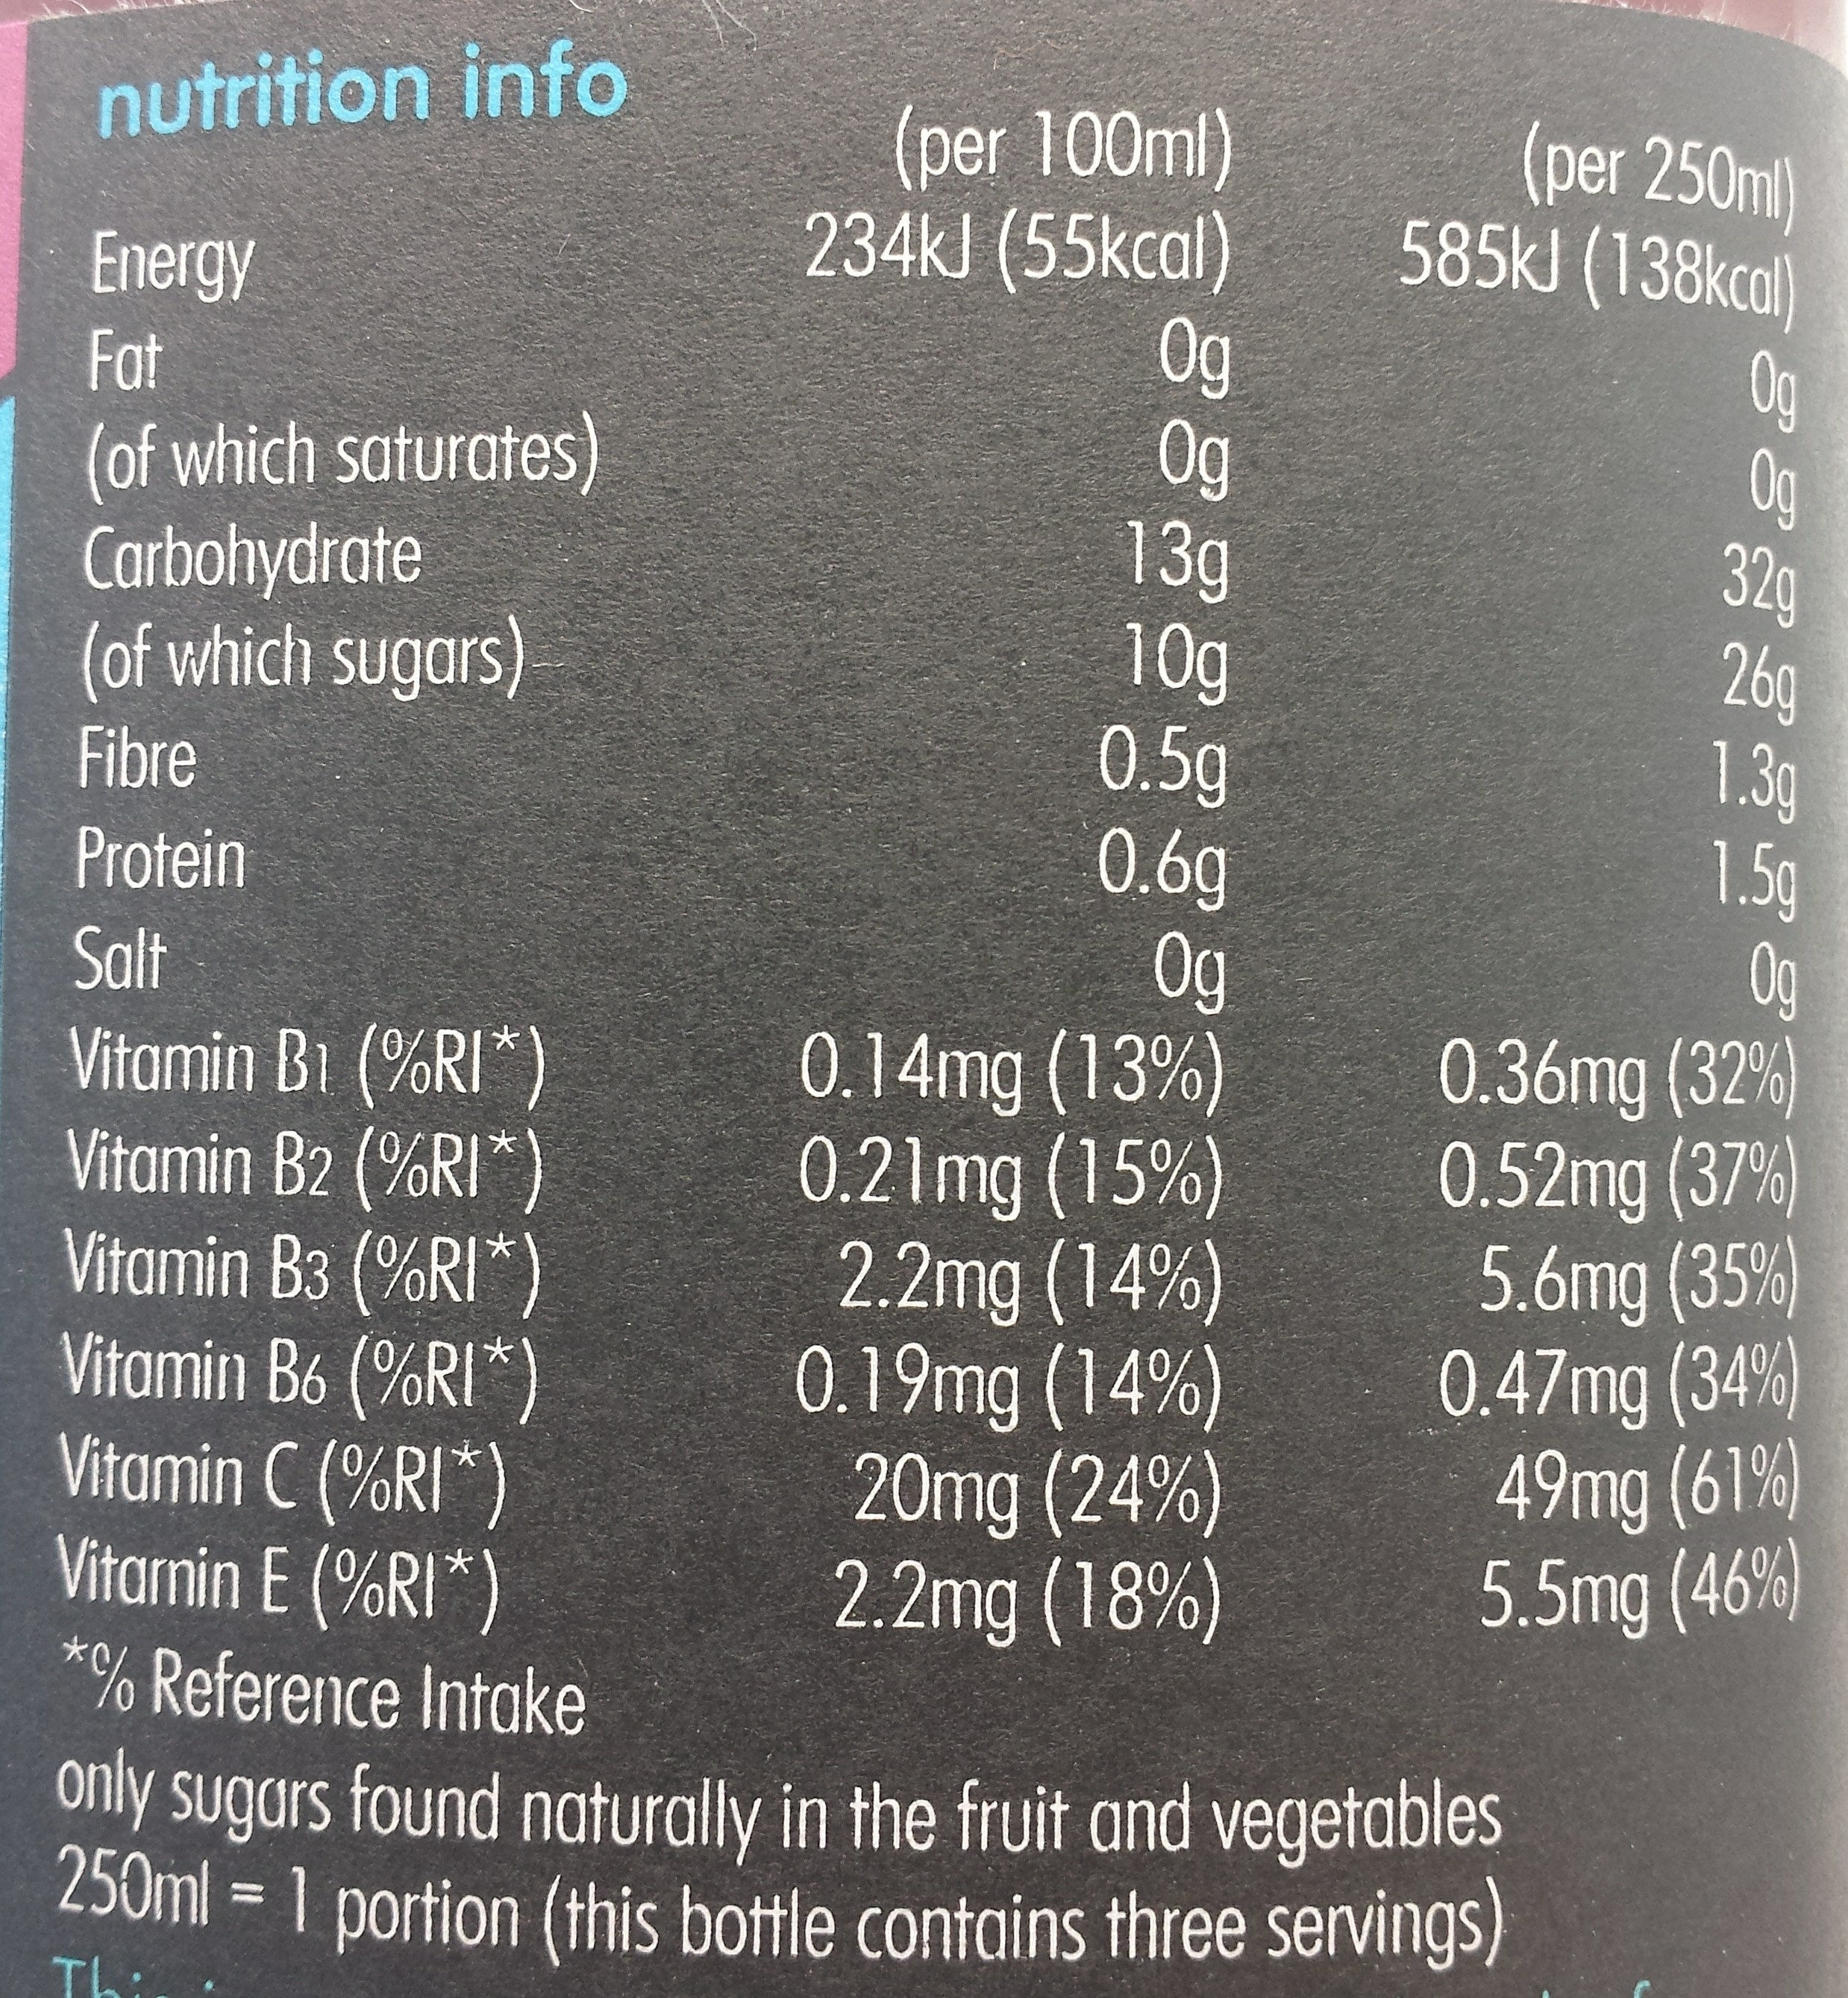 Uplift Super Smoothie - Nutrition facts